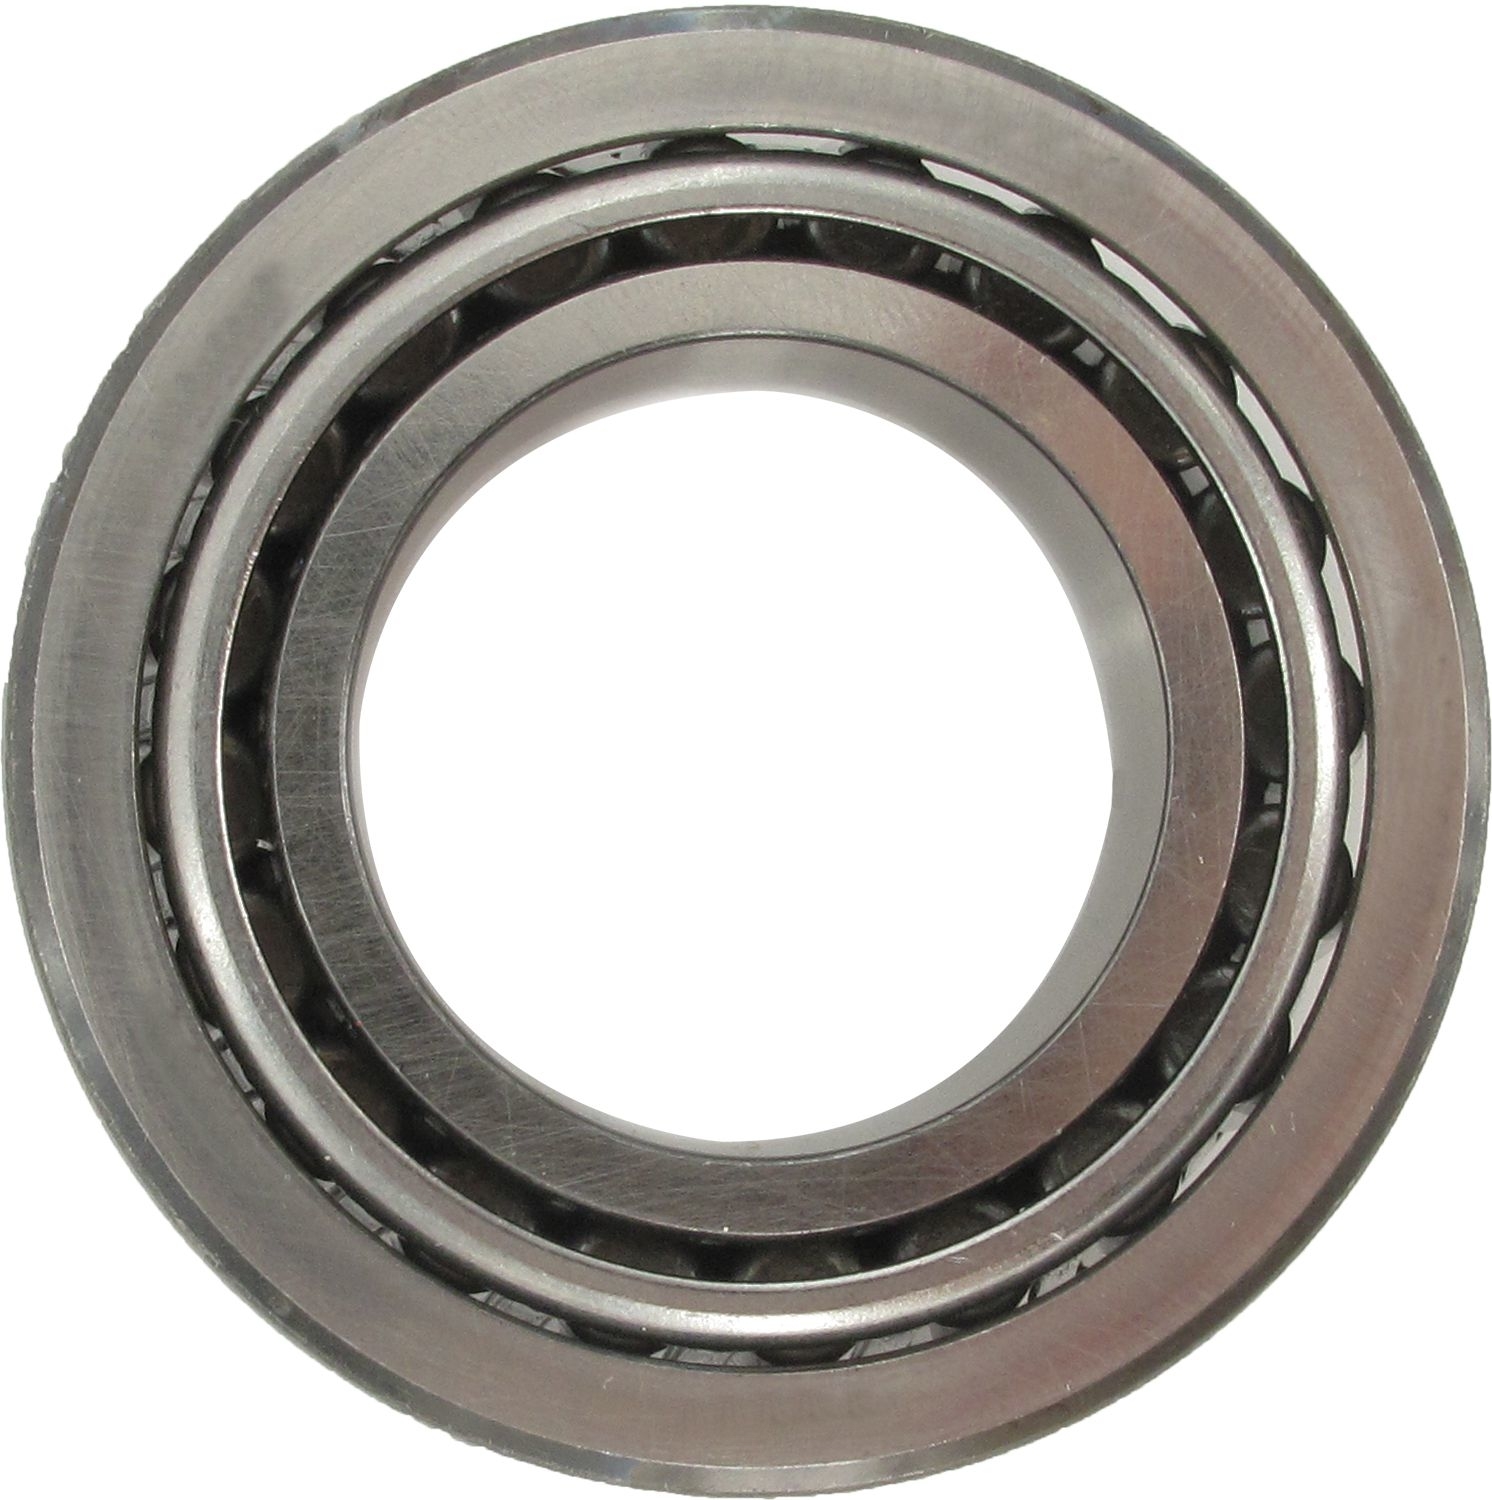 SKF (CHICAGO RAWHIDE) - Auto Trans Pinion Bearing (Front) - SKF BR6 VP